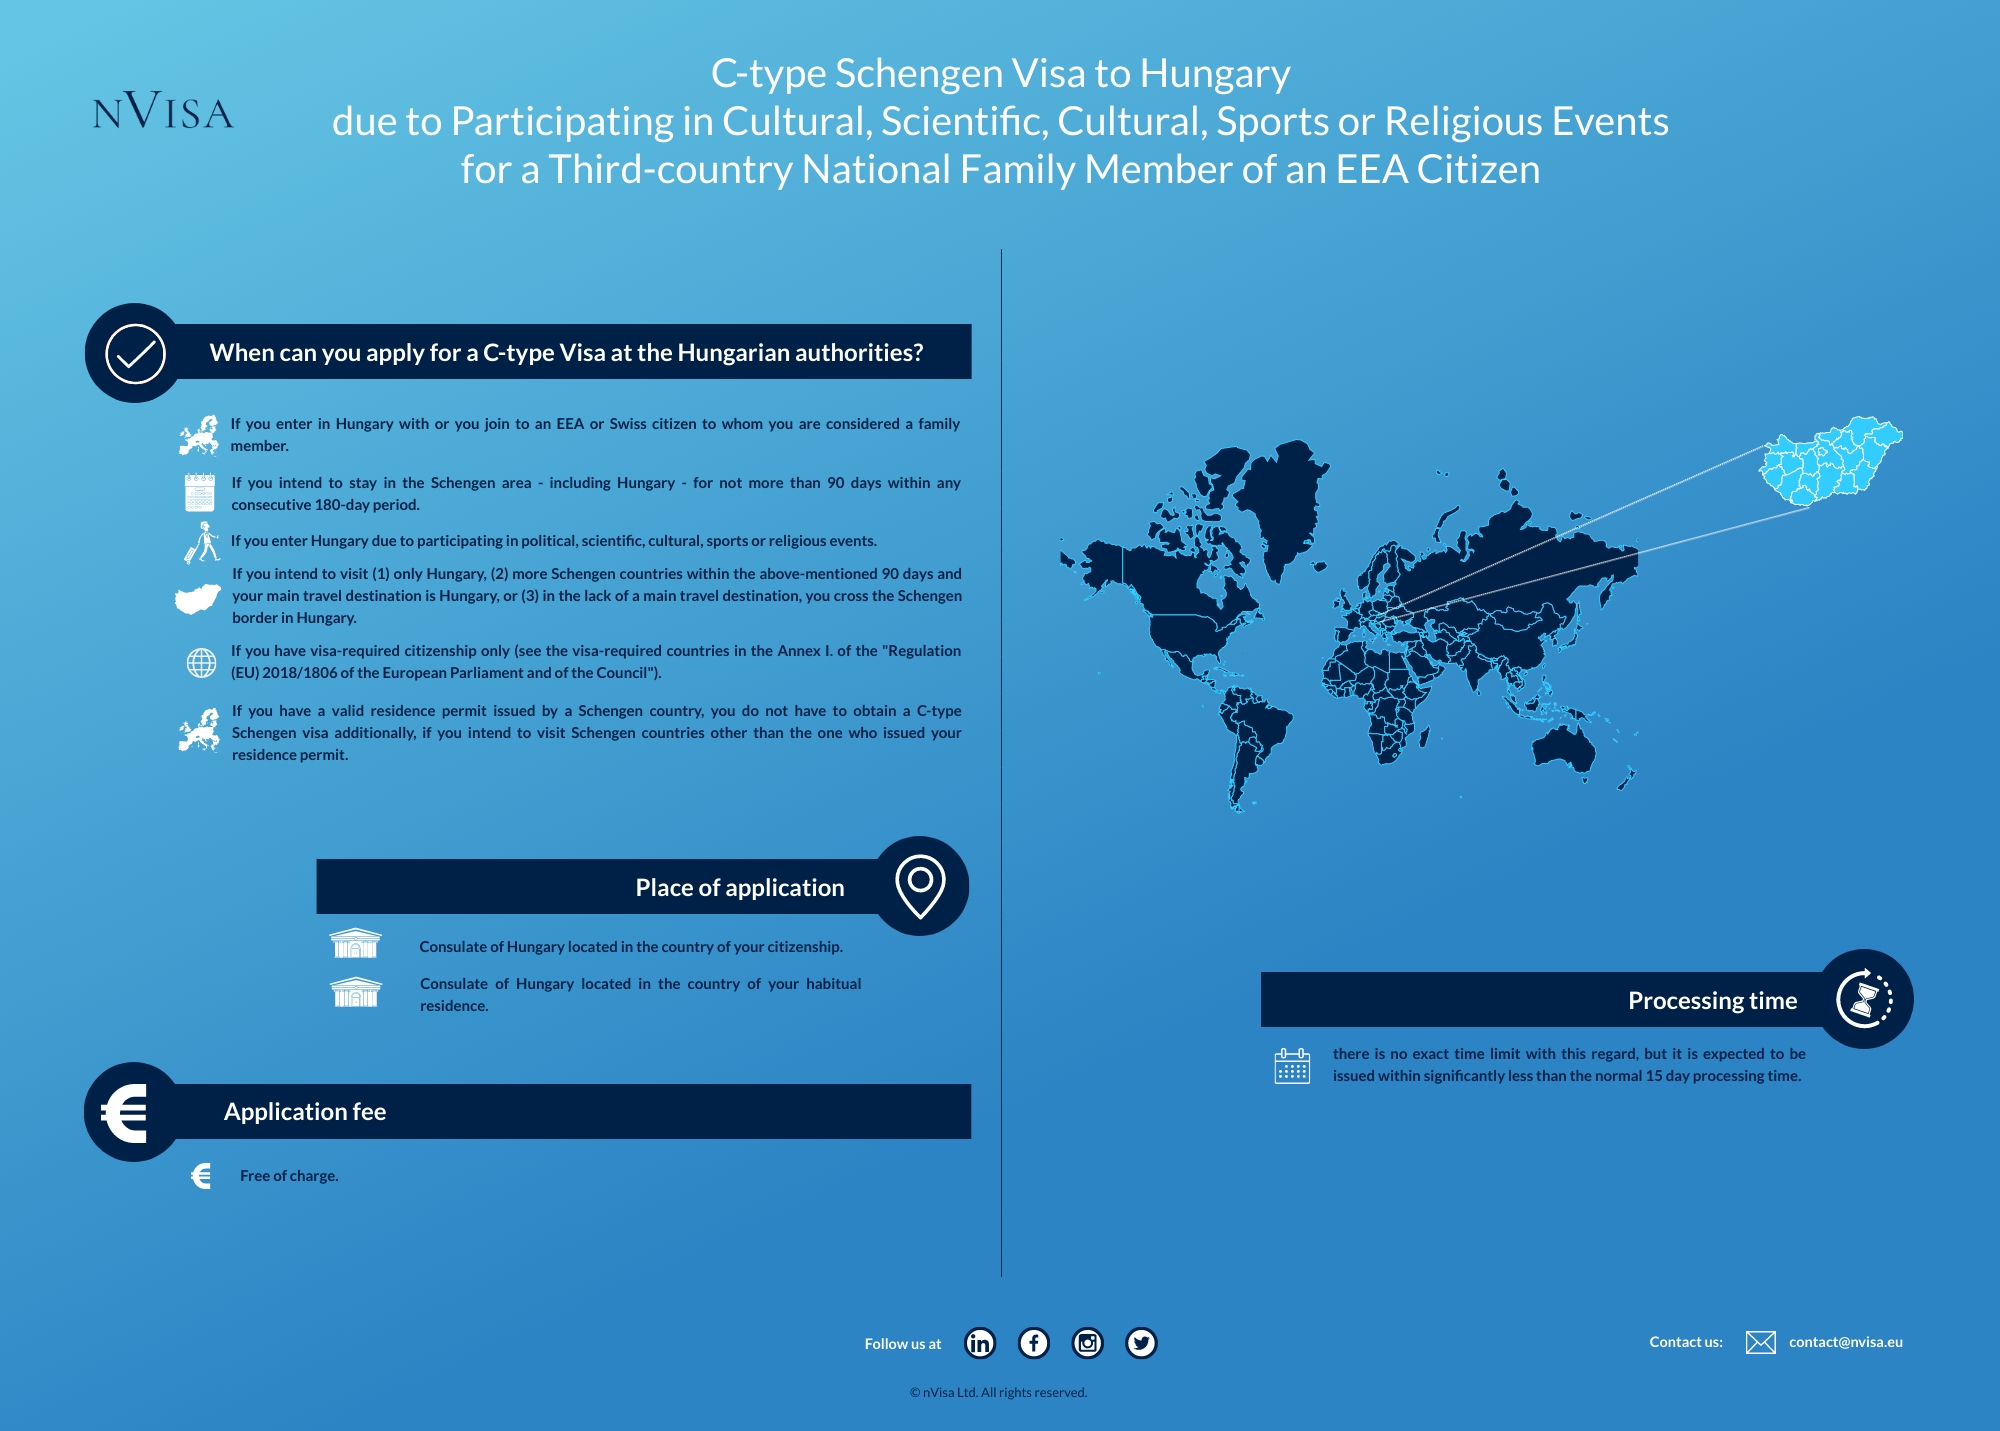 Infographic about immigration requirements and the details of obtaining a C-type Schengen Visa for the purposes of tourism or to visit family or friends in Hungary for a third-country national Family Member of an EEA Citizen.